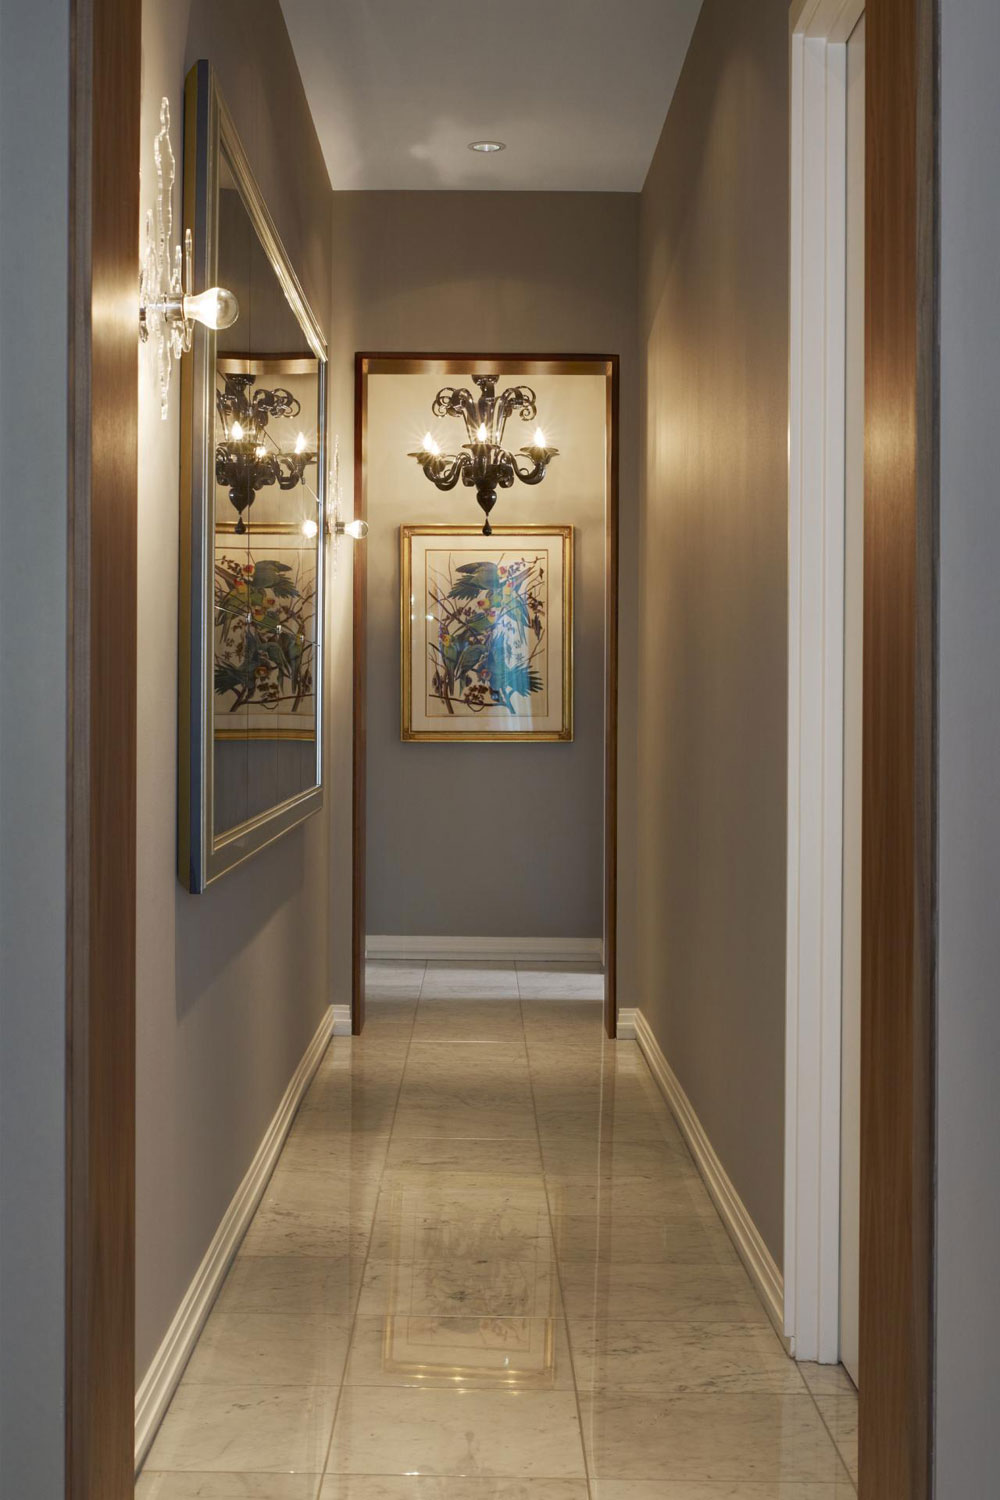 Warm Your Day With These Hallway Decorations Ideas-5 Warm your day with these hallway decorating ideas